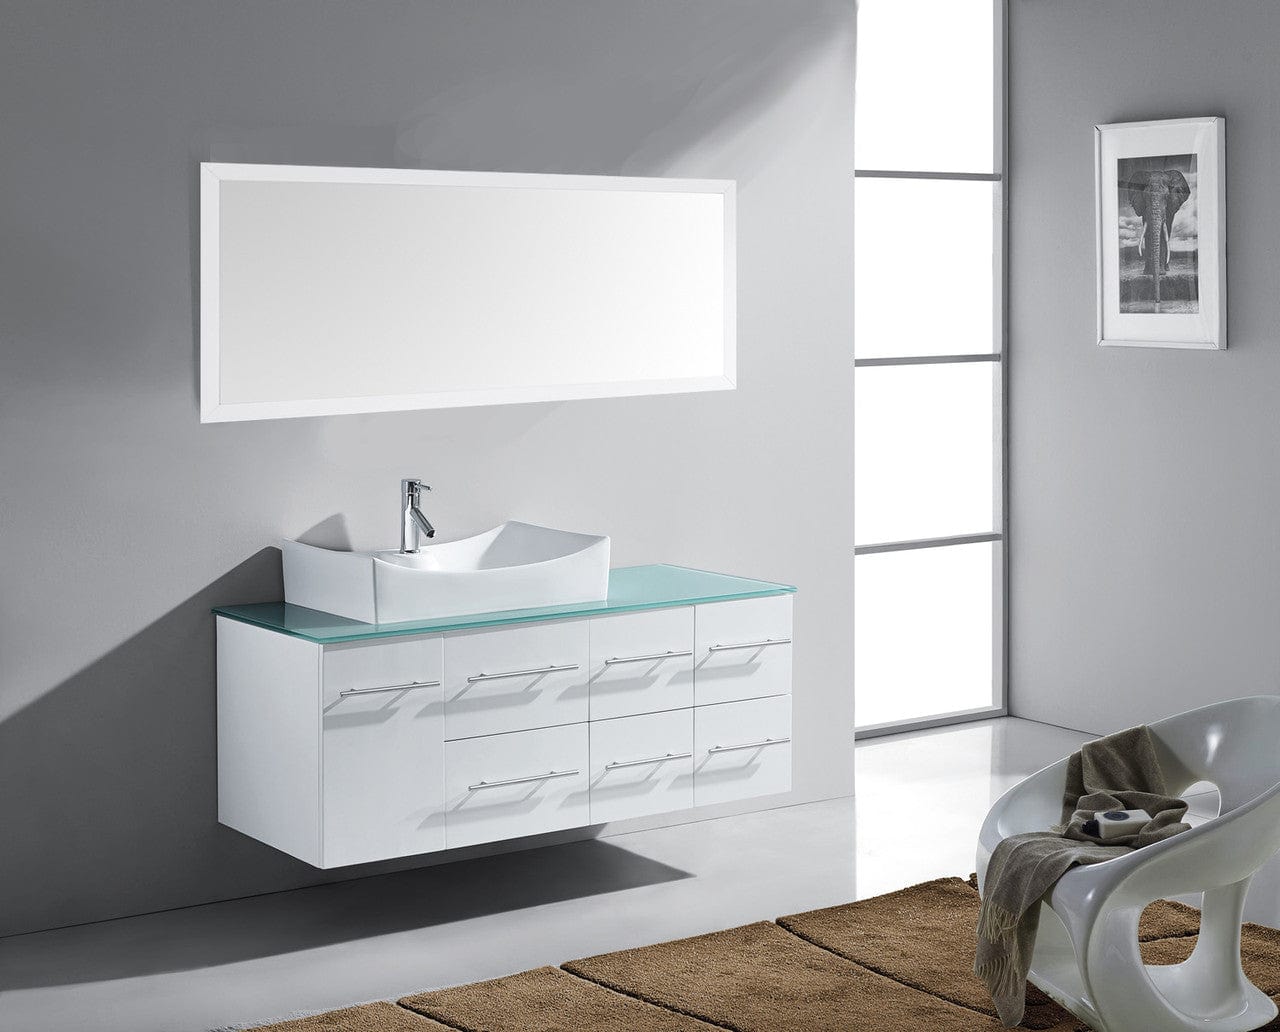  Virtu USA Ceanna 55 Single Bathroom Vanity Set in White w/ Tempered Glass Counter-Top | Square Basin side view